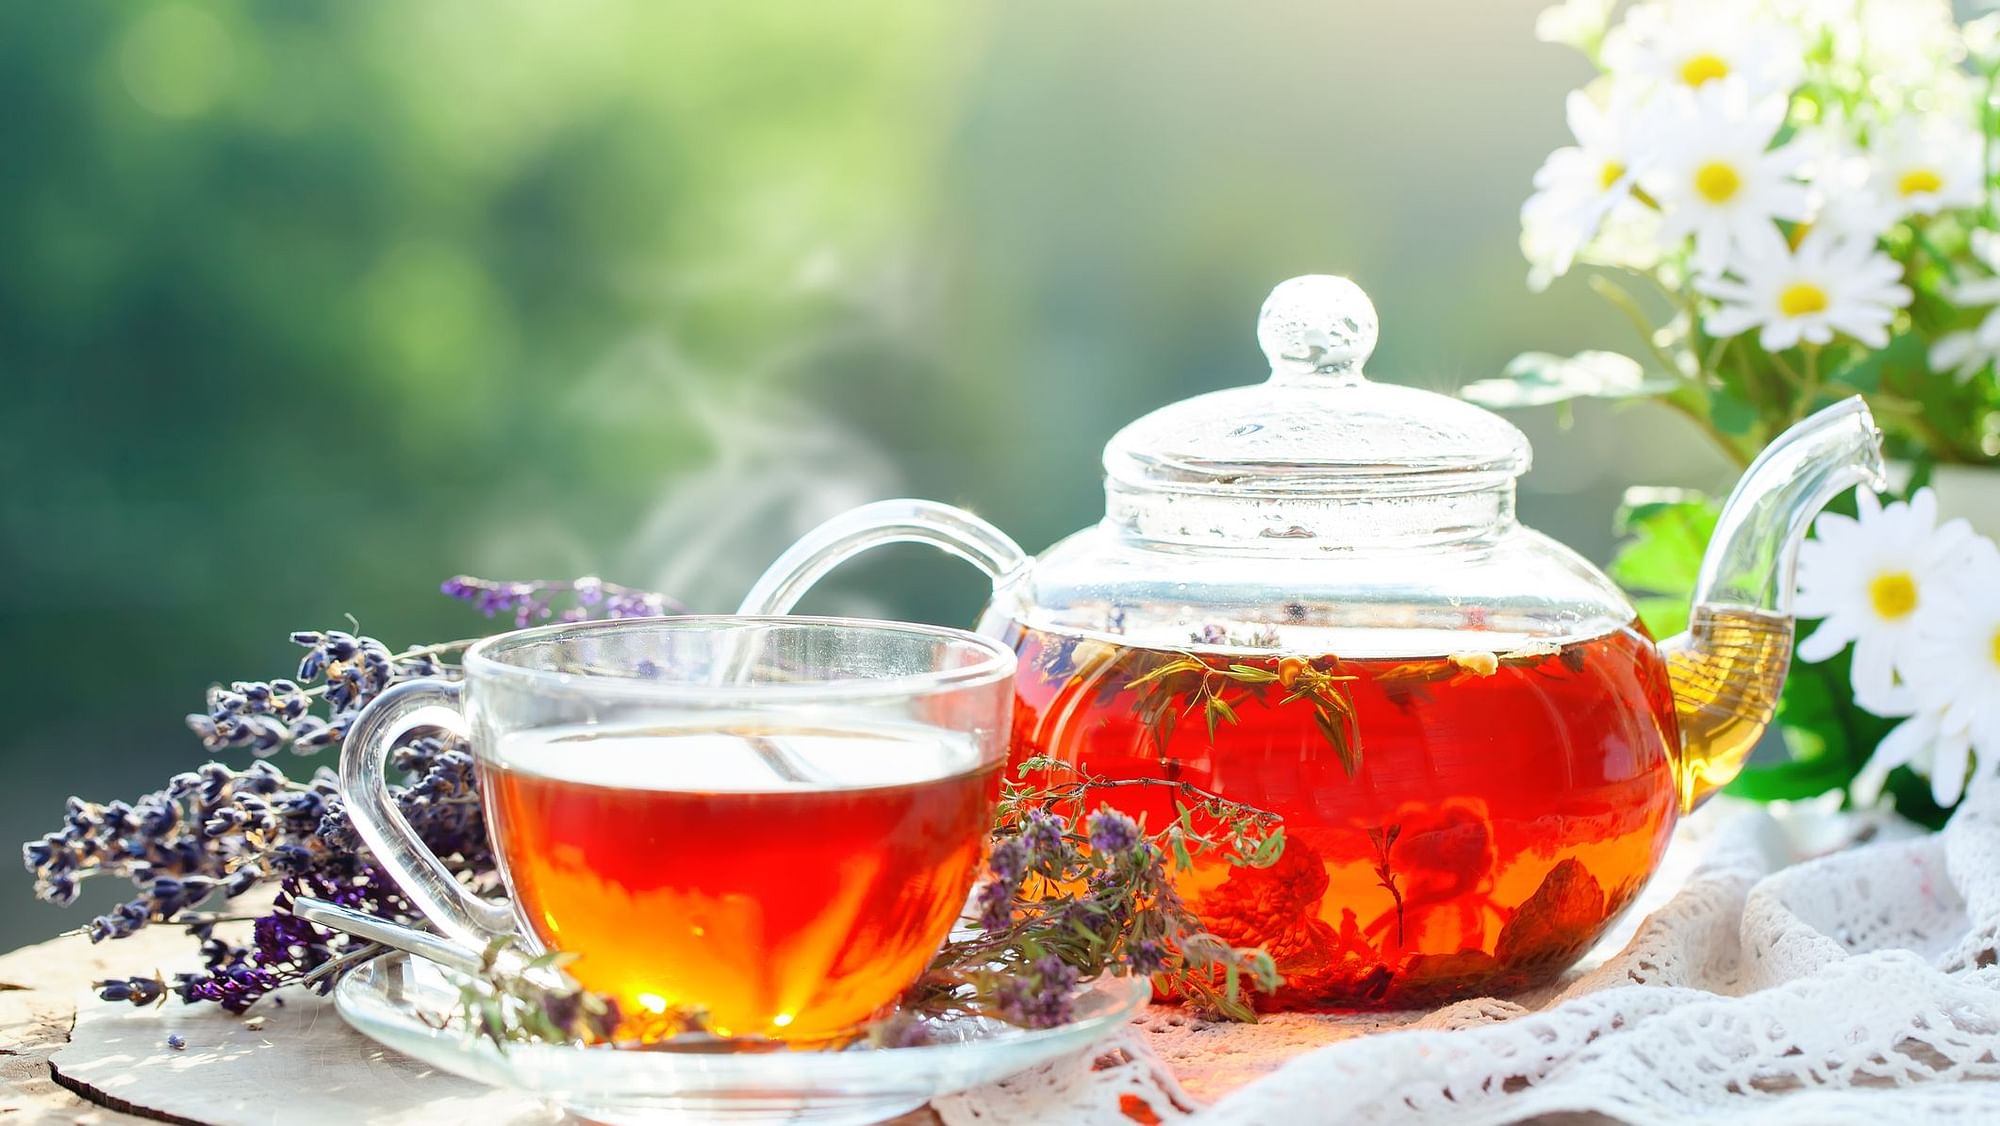 Here are teas to enjoy during summers.